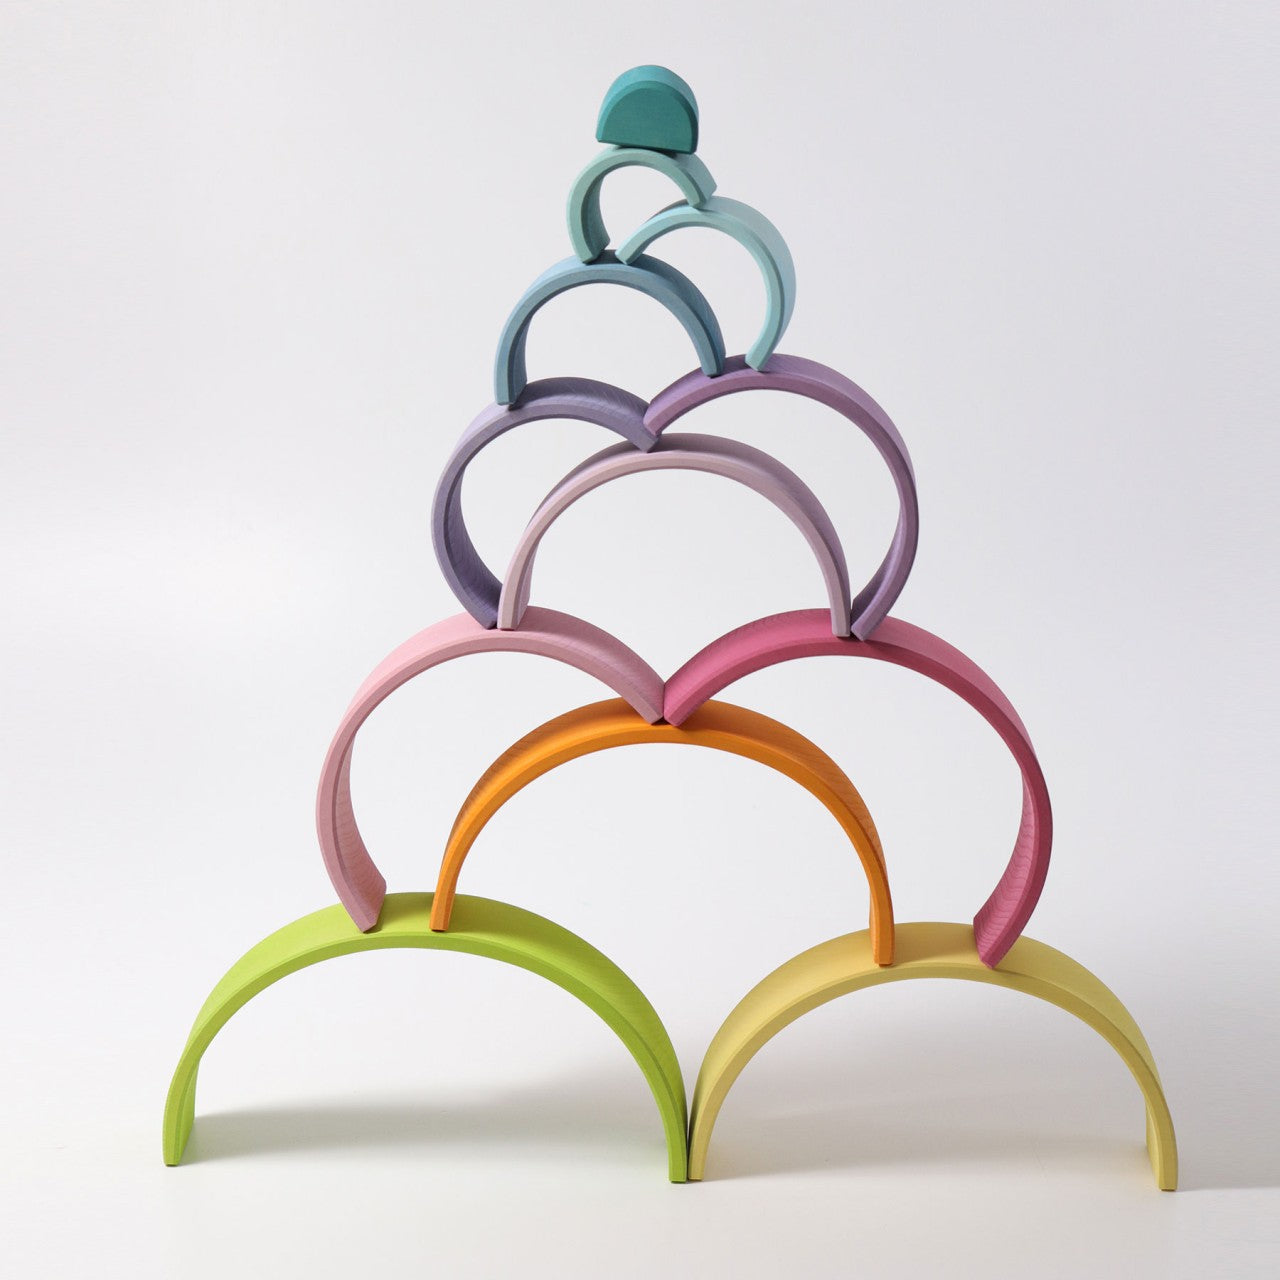 Large wooden rainbow toy by Grimms.